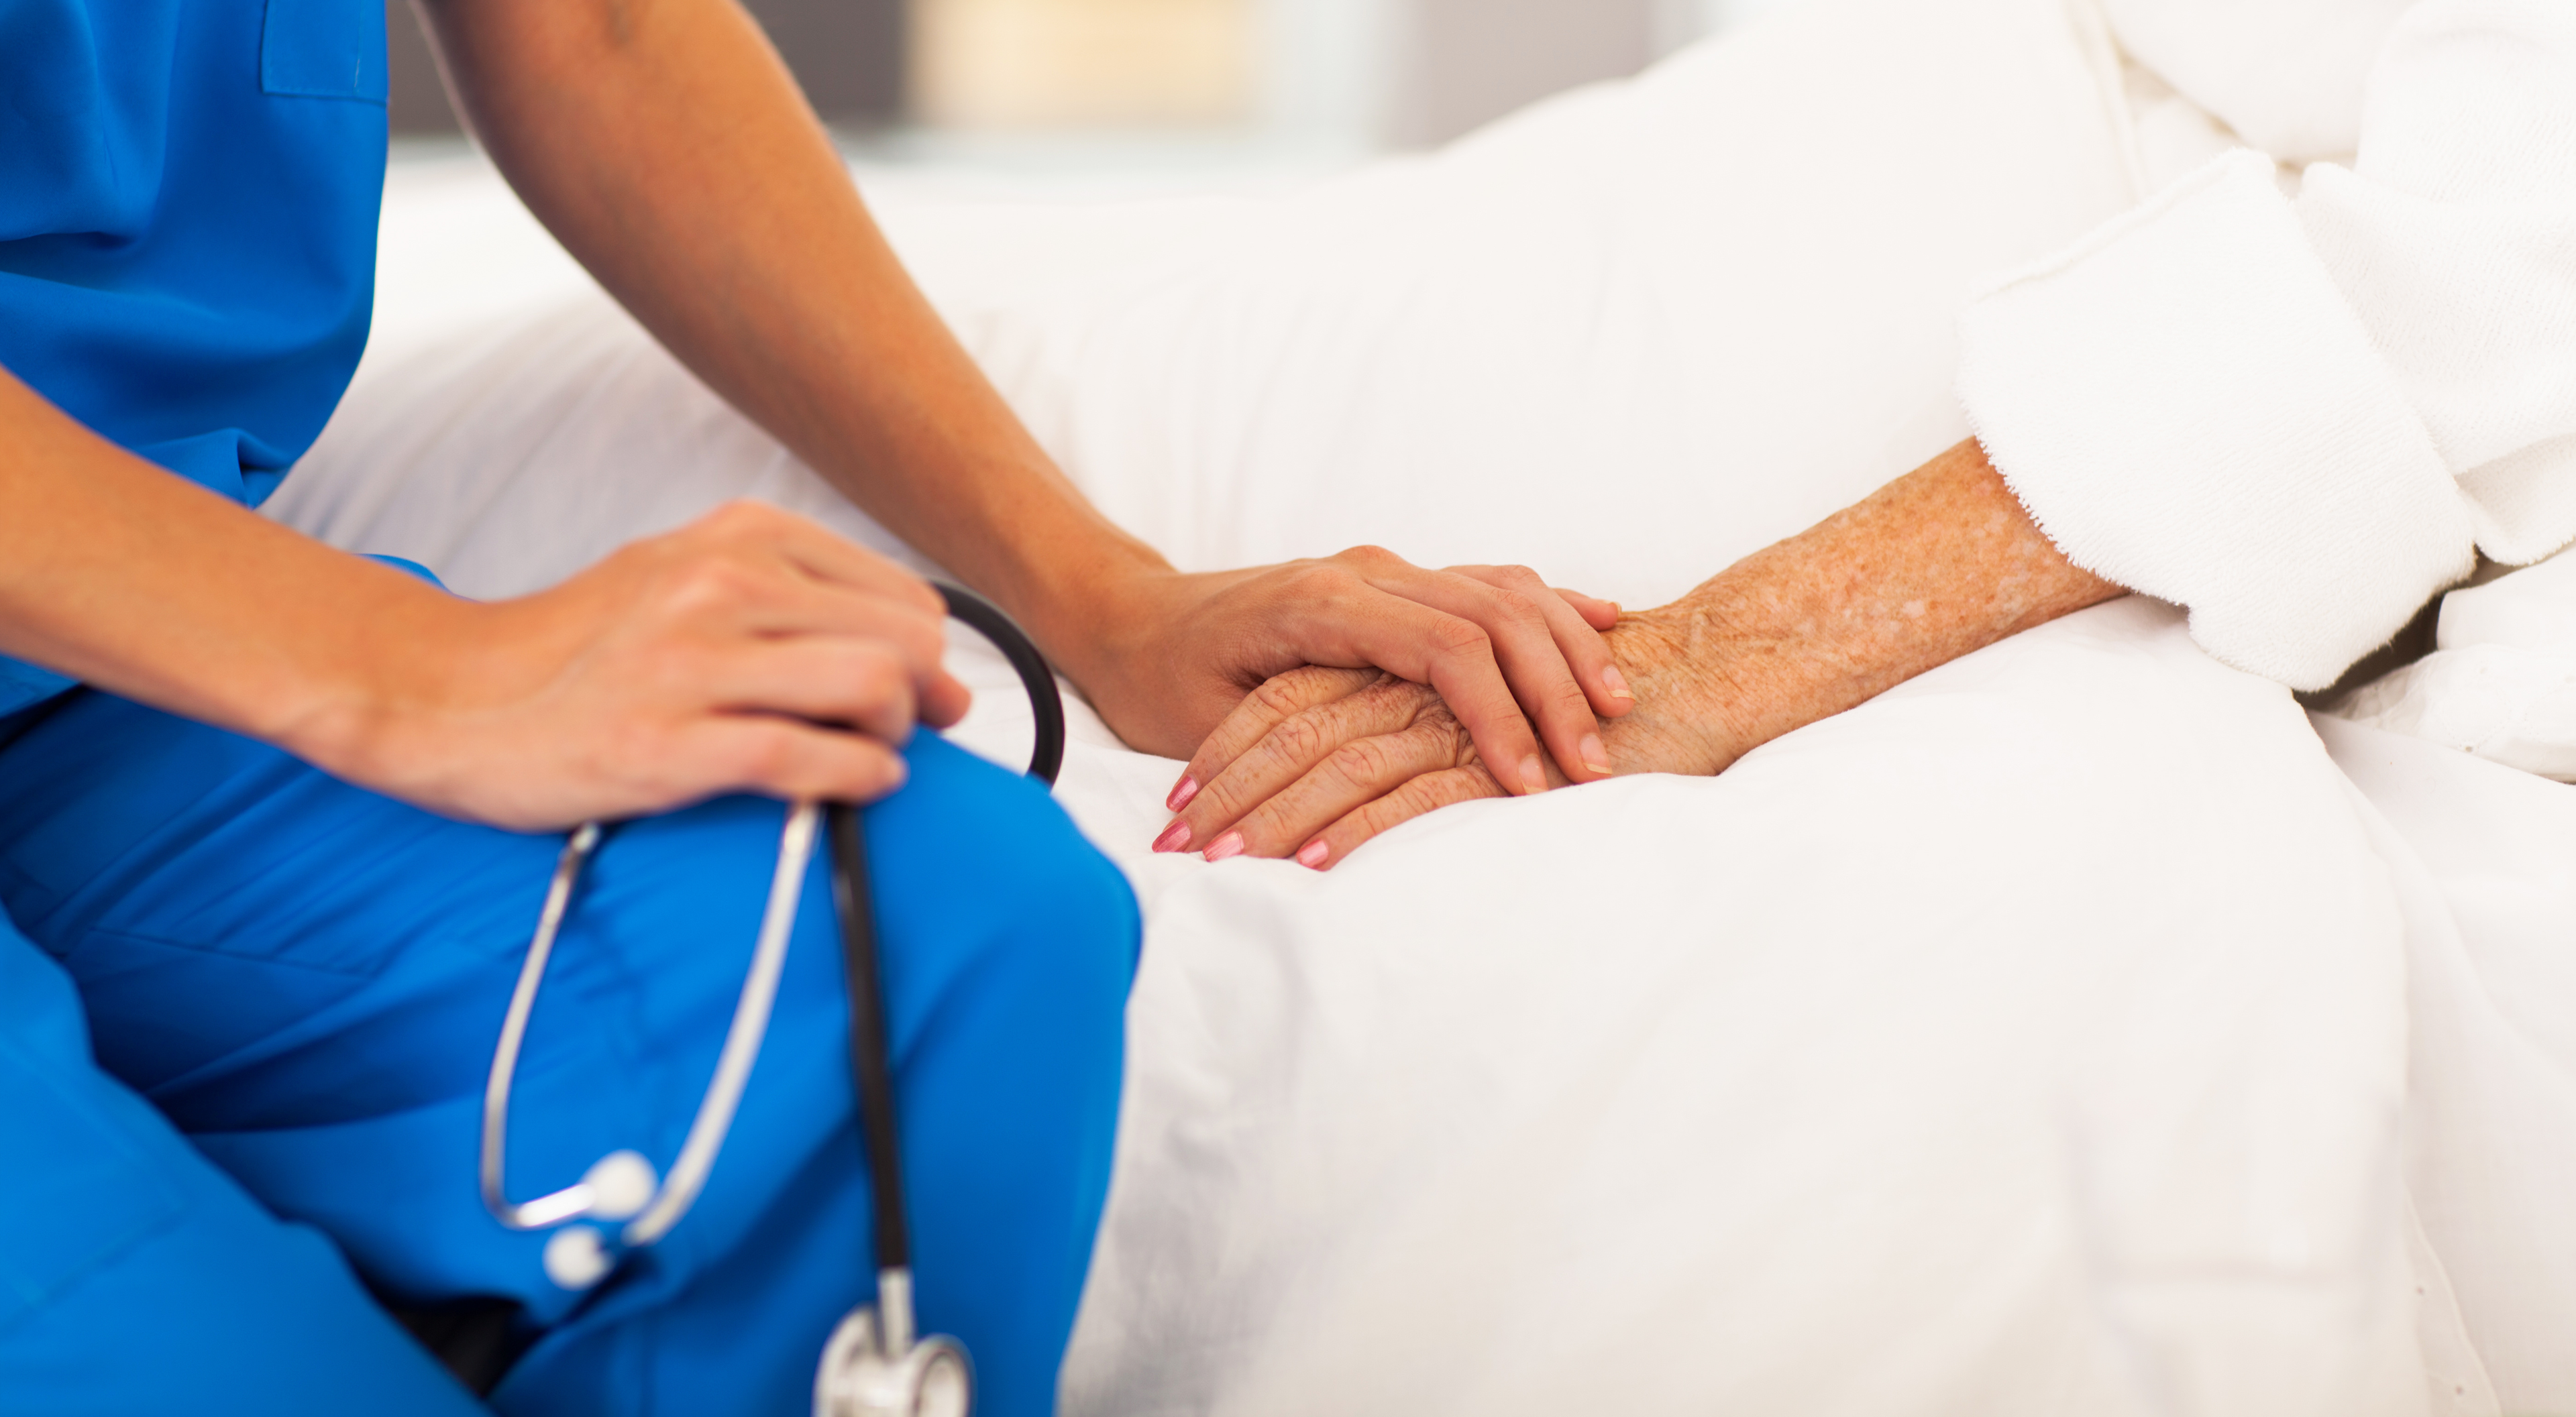 What Oncology Nurses Should Understand About Medical Aid in Dying